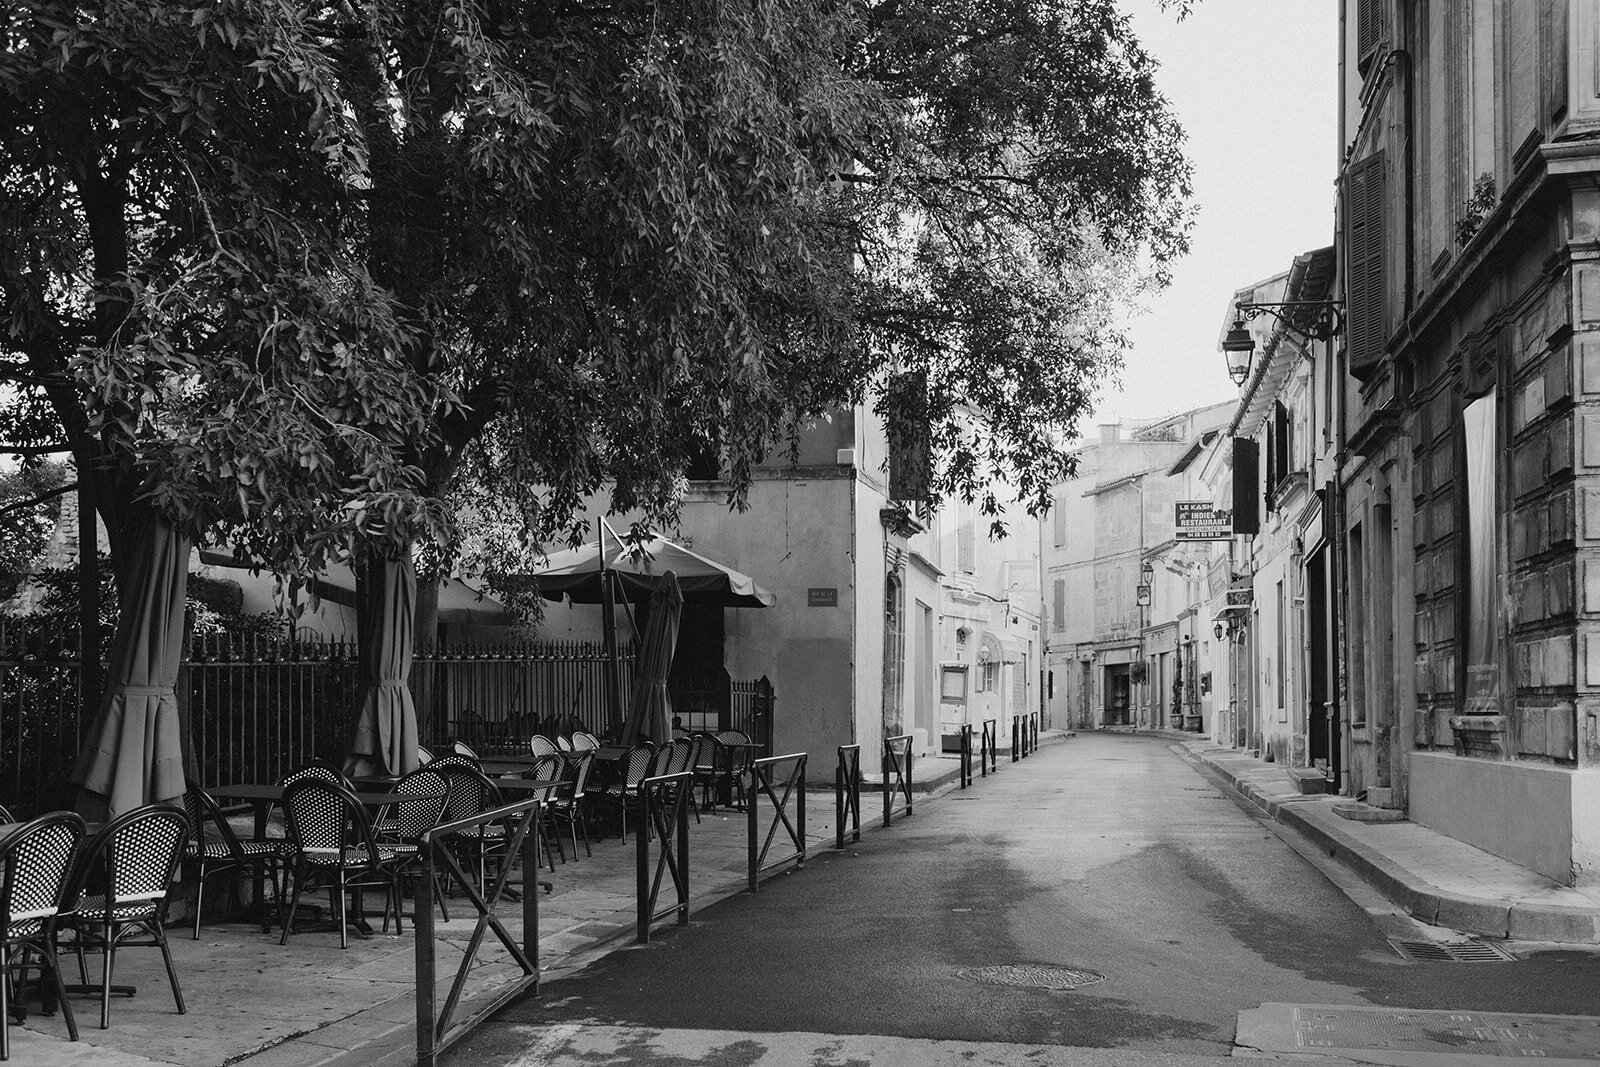 The lovely provencal streets of Arles, France